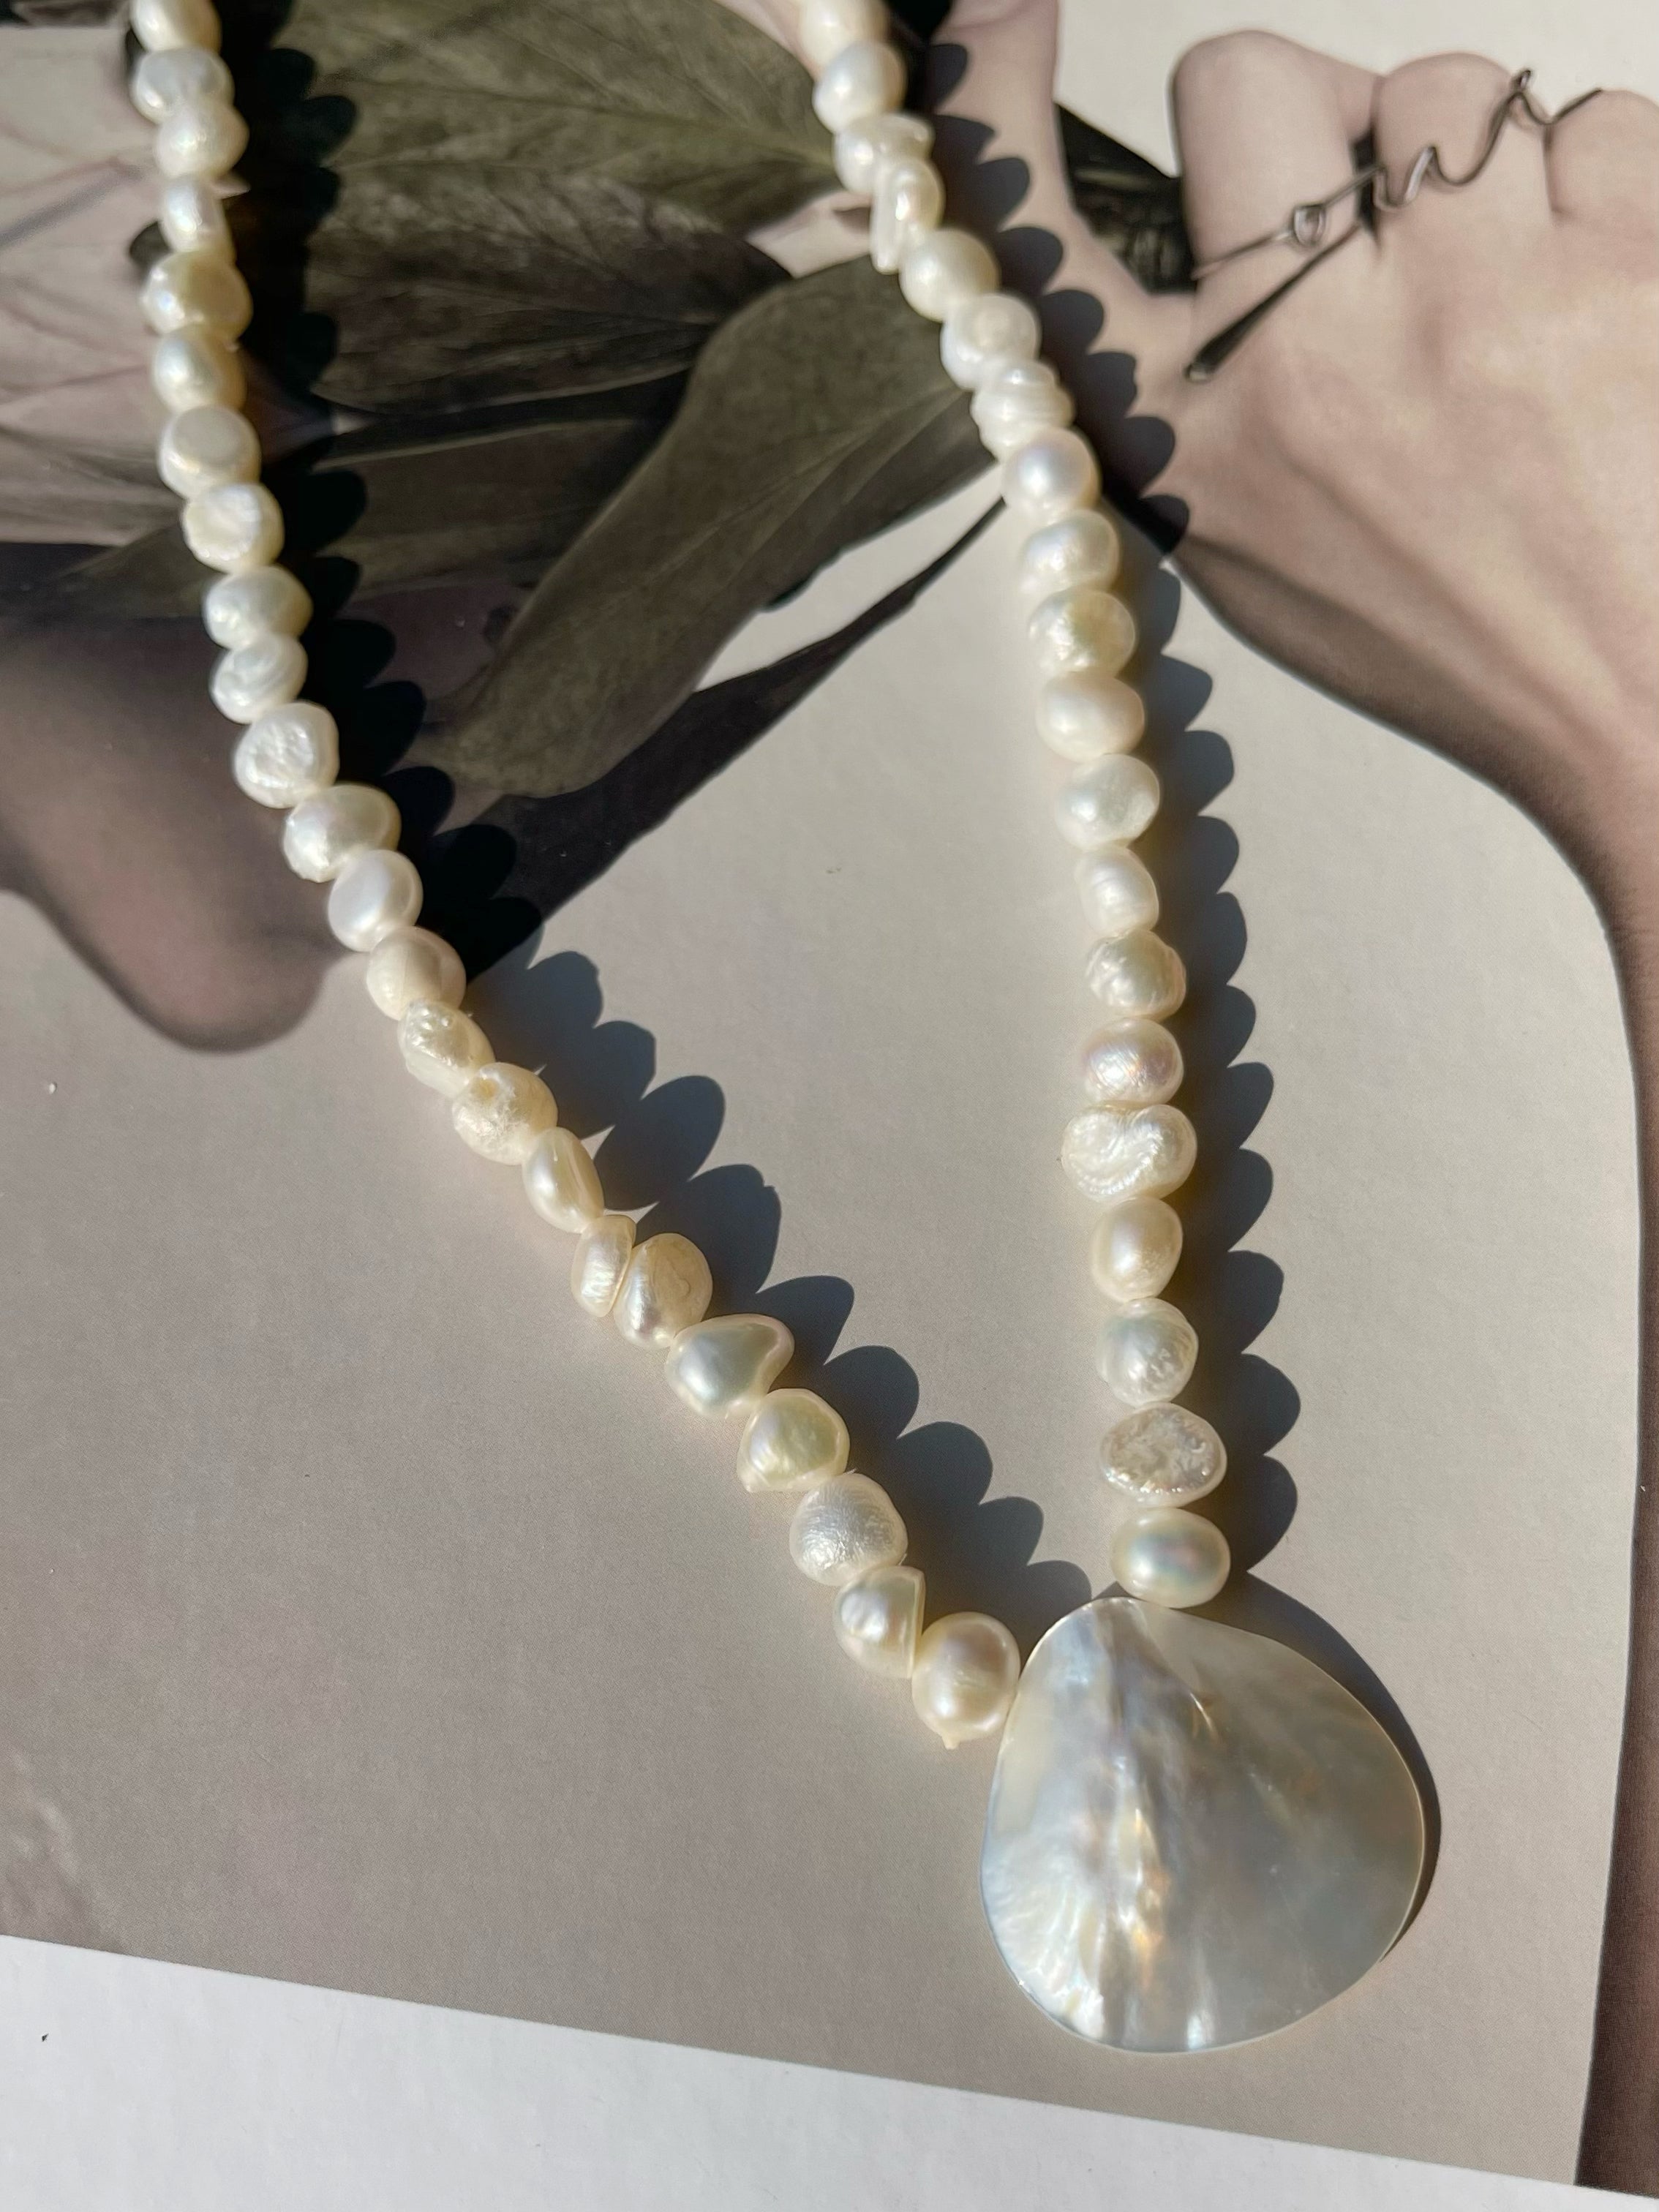 Mermaid Pearl Choker Necklace - Ideal for bohemian fashion lovers, suitable for beach vacations, beach weddings, or daily fashion. Offers minimalistic, boho, and beach-inspired style.